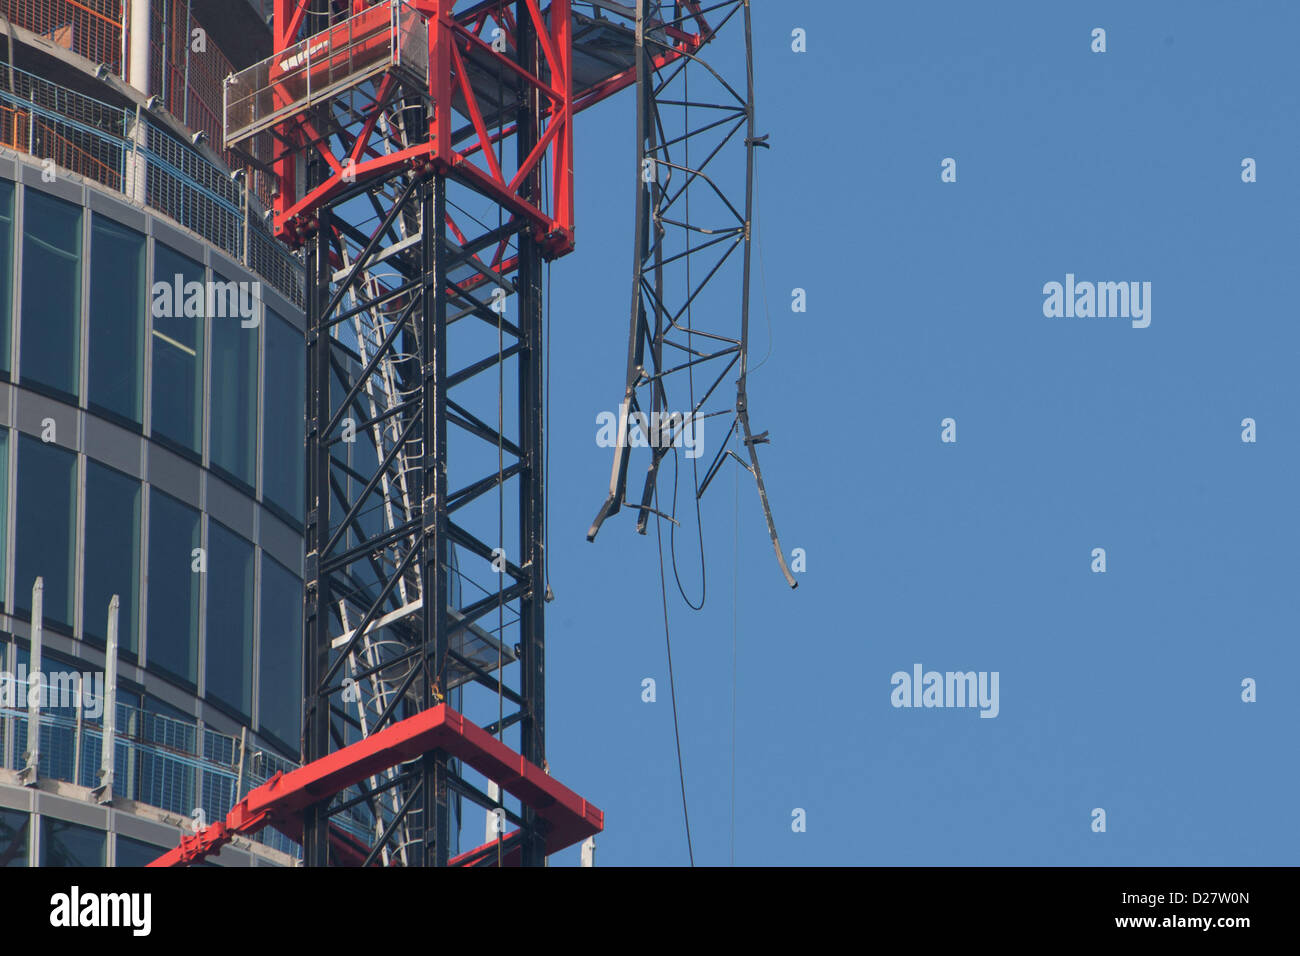 London, UK. 16th January 2013. Damaged crane on St George's Wharf tower that an Agusta 109 helicopter had collided with in Wandsworth Road in Vauxhall, London, 16th January 2013. Credit:  martyn wheatley / Alamy Live News Stock Photo